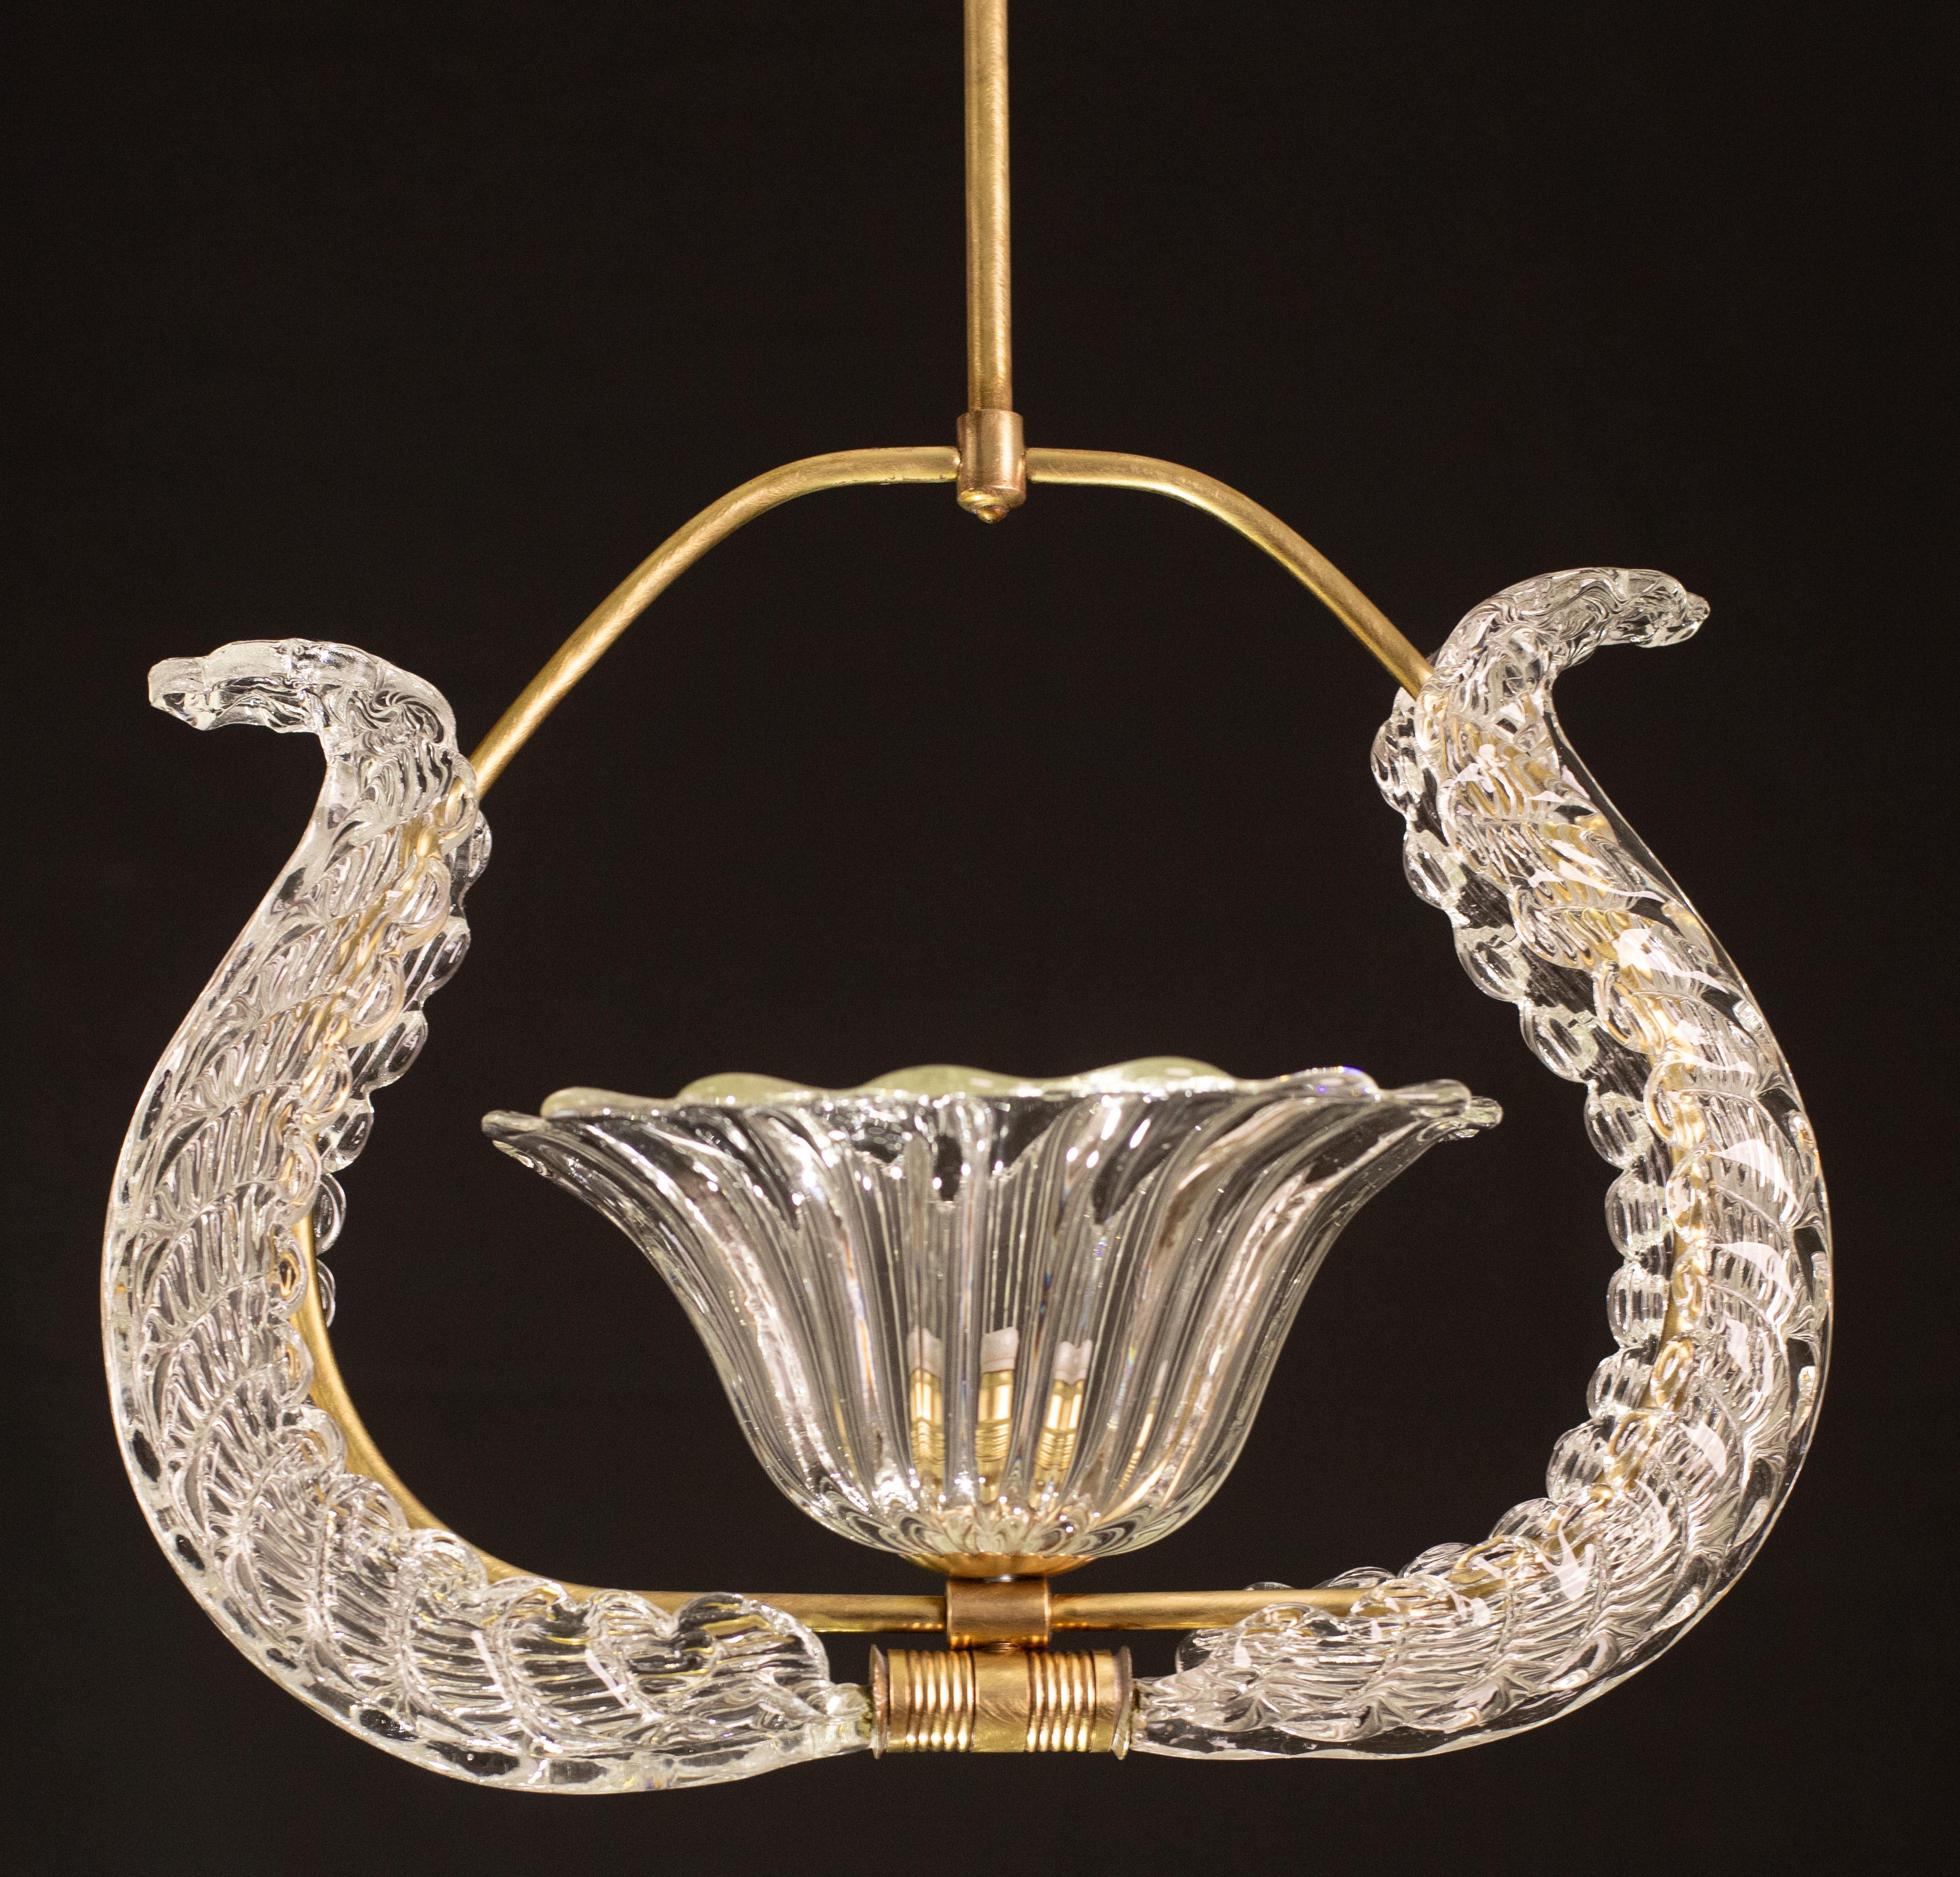 Charming Art Decò Barovier and Toso Chandelier, 1940s For Sale 5